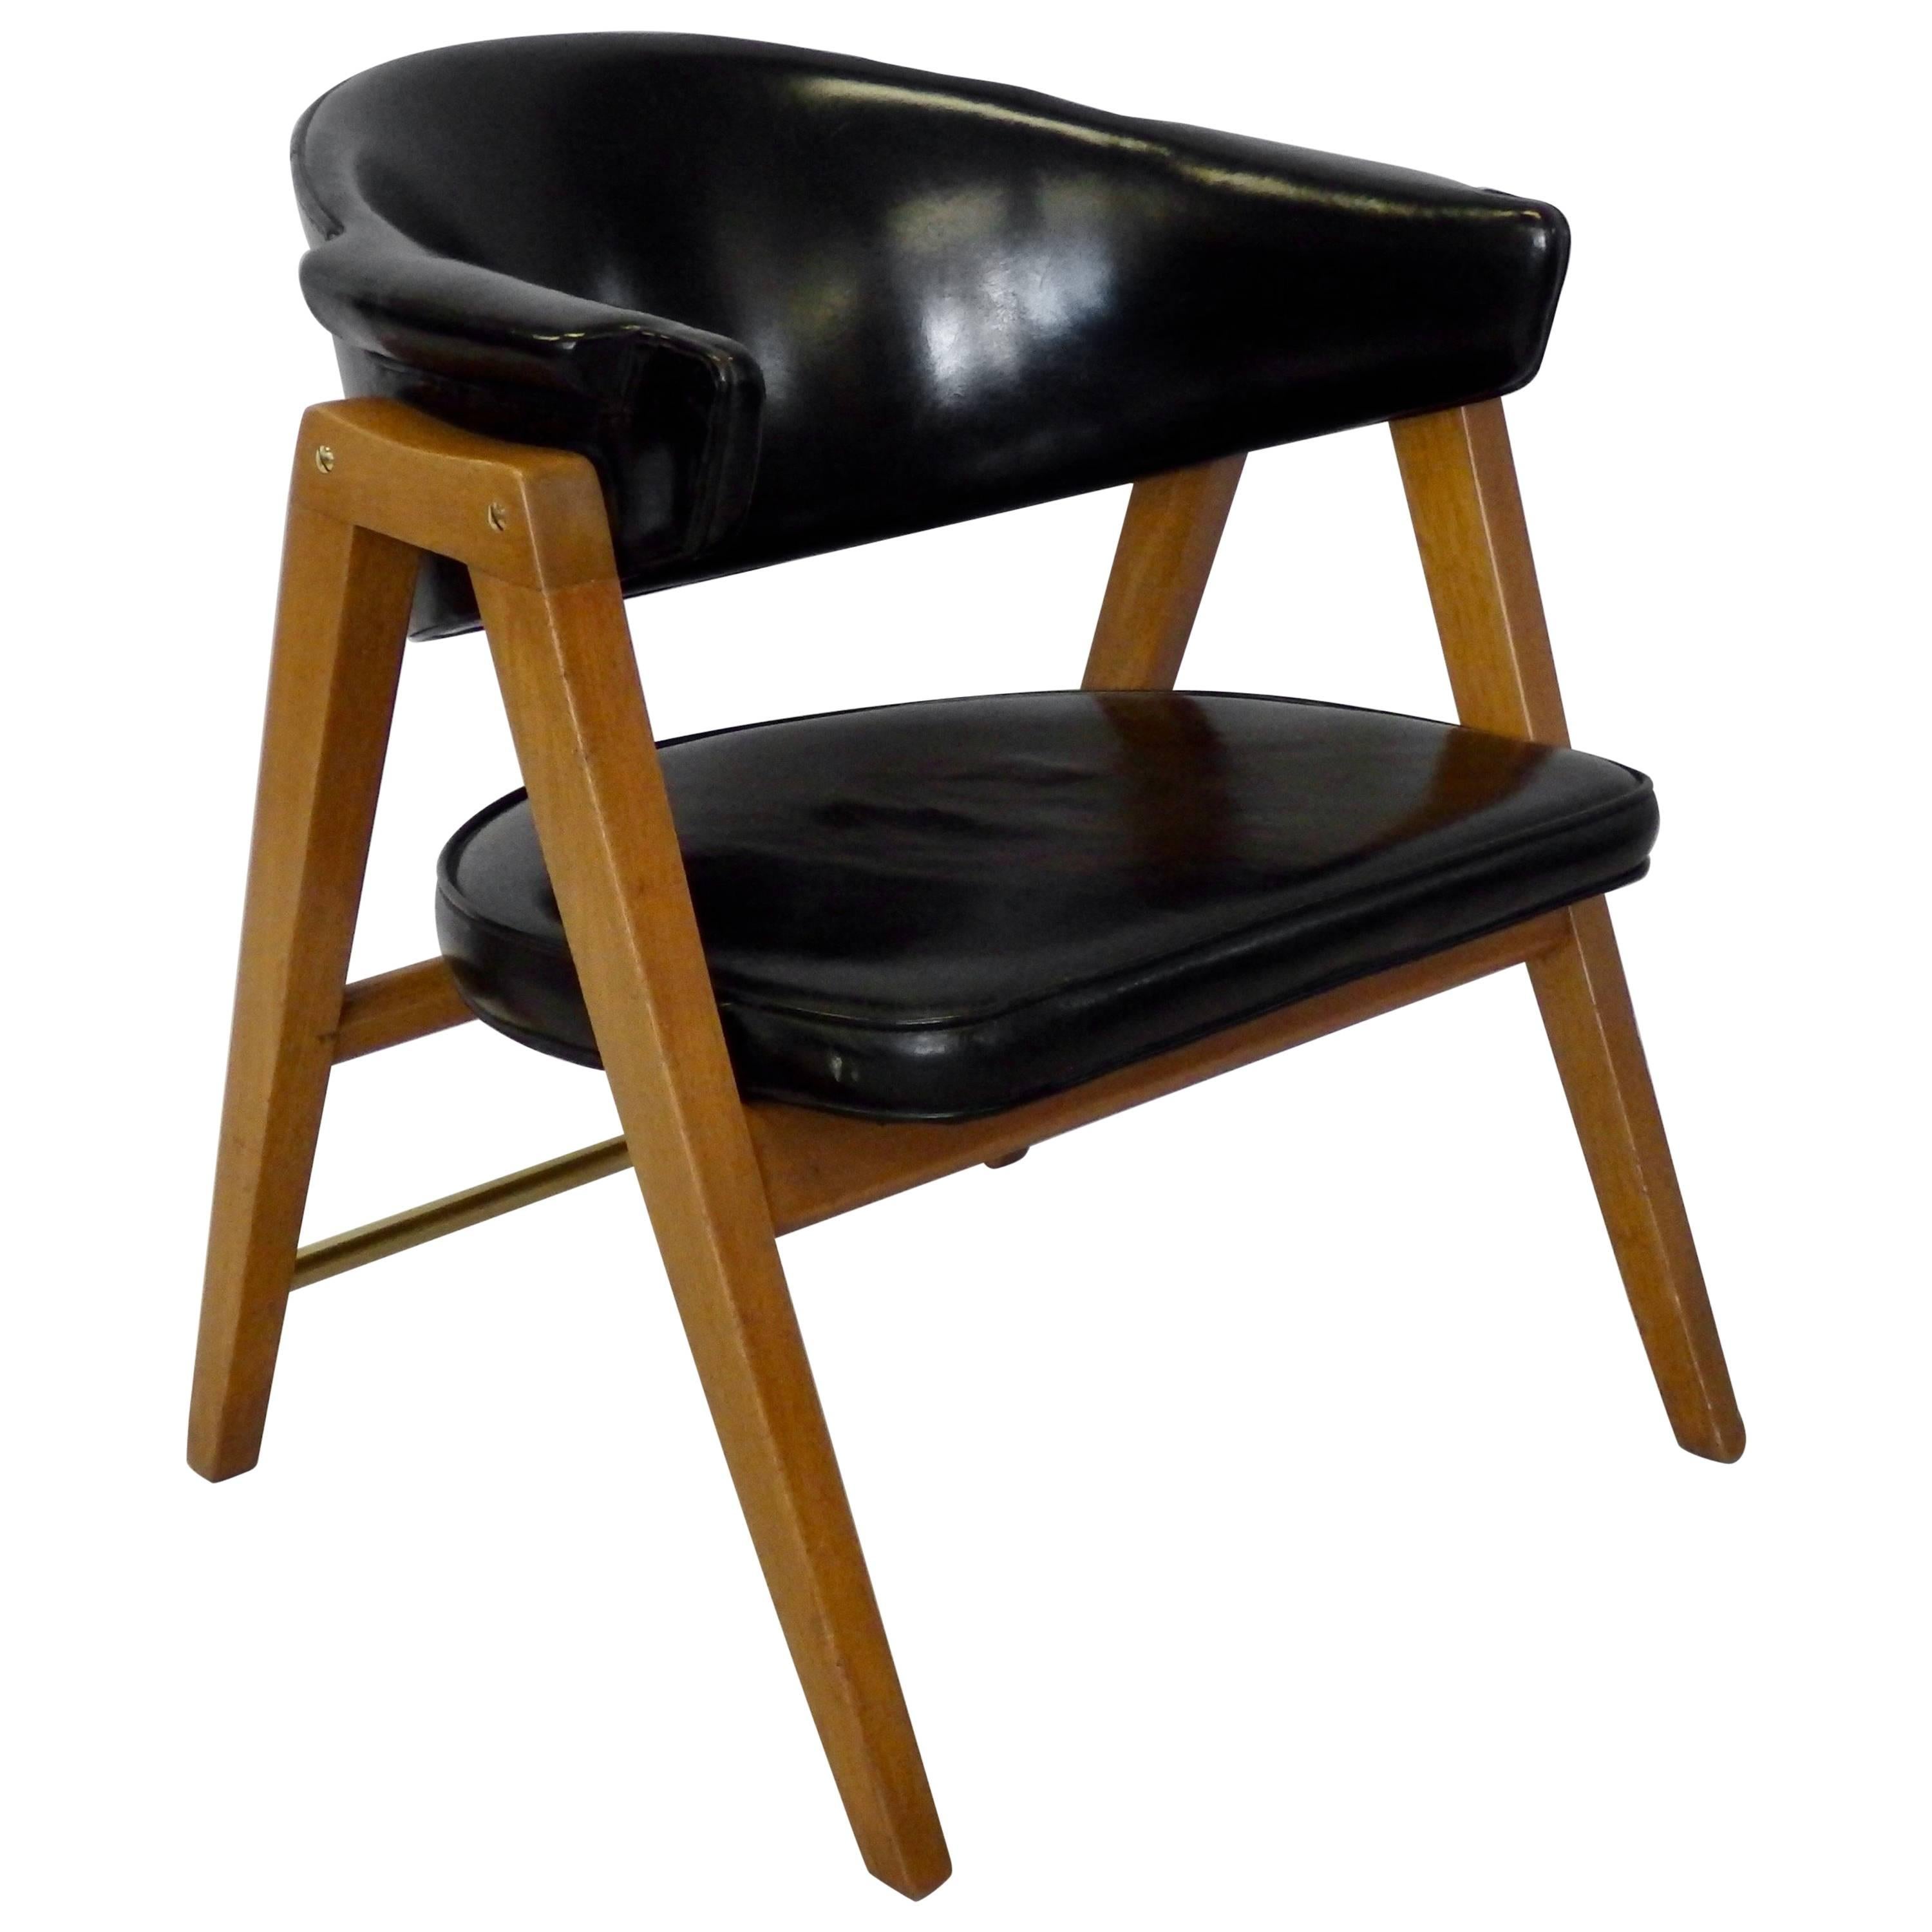 Edward Wormley for Dunbar Lounge Chair with Black Leather